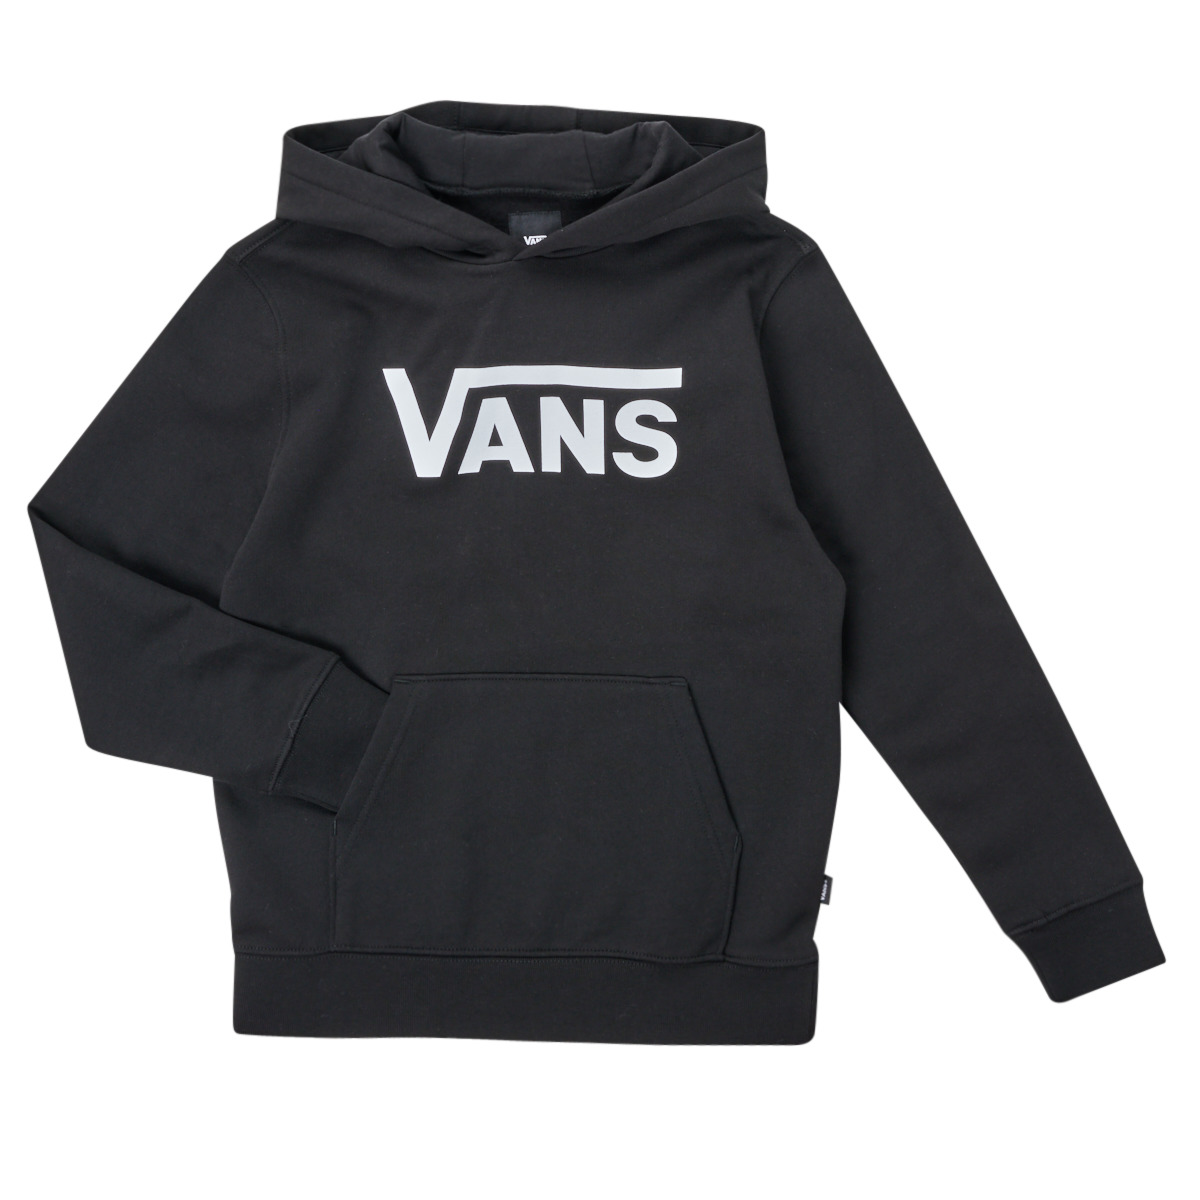 Child KIDS | Black - Vans BY Clothing sweaters Free VANS CLASSIC - PO Spartoo NET delivery !